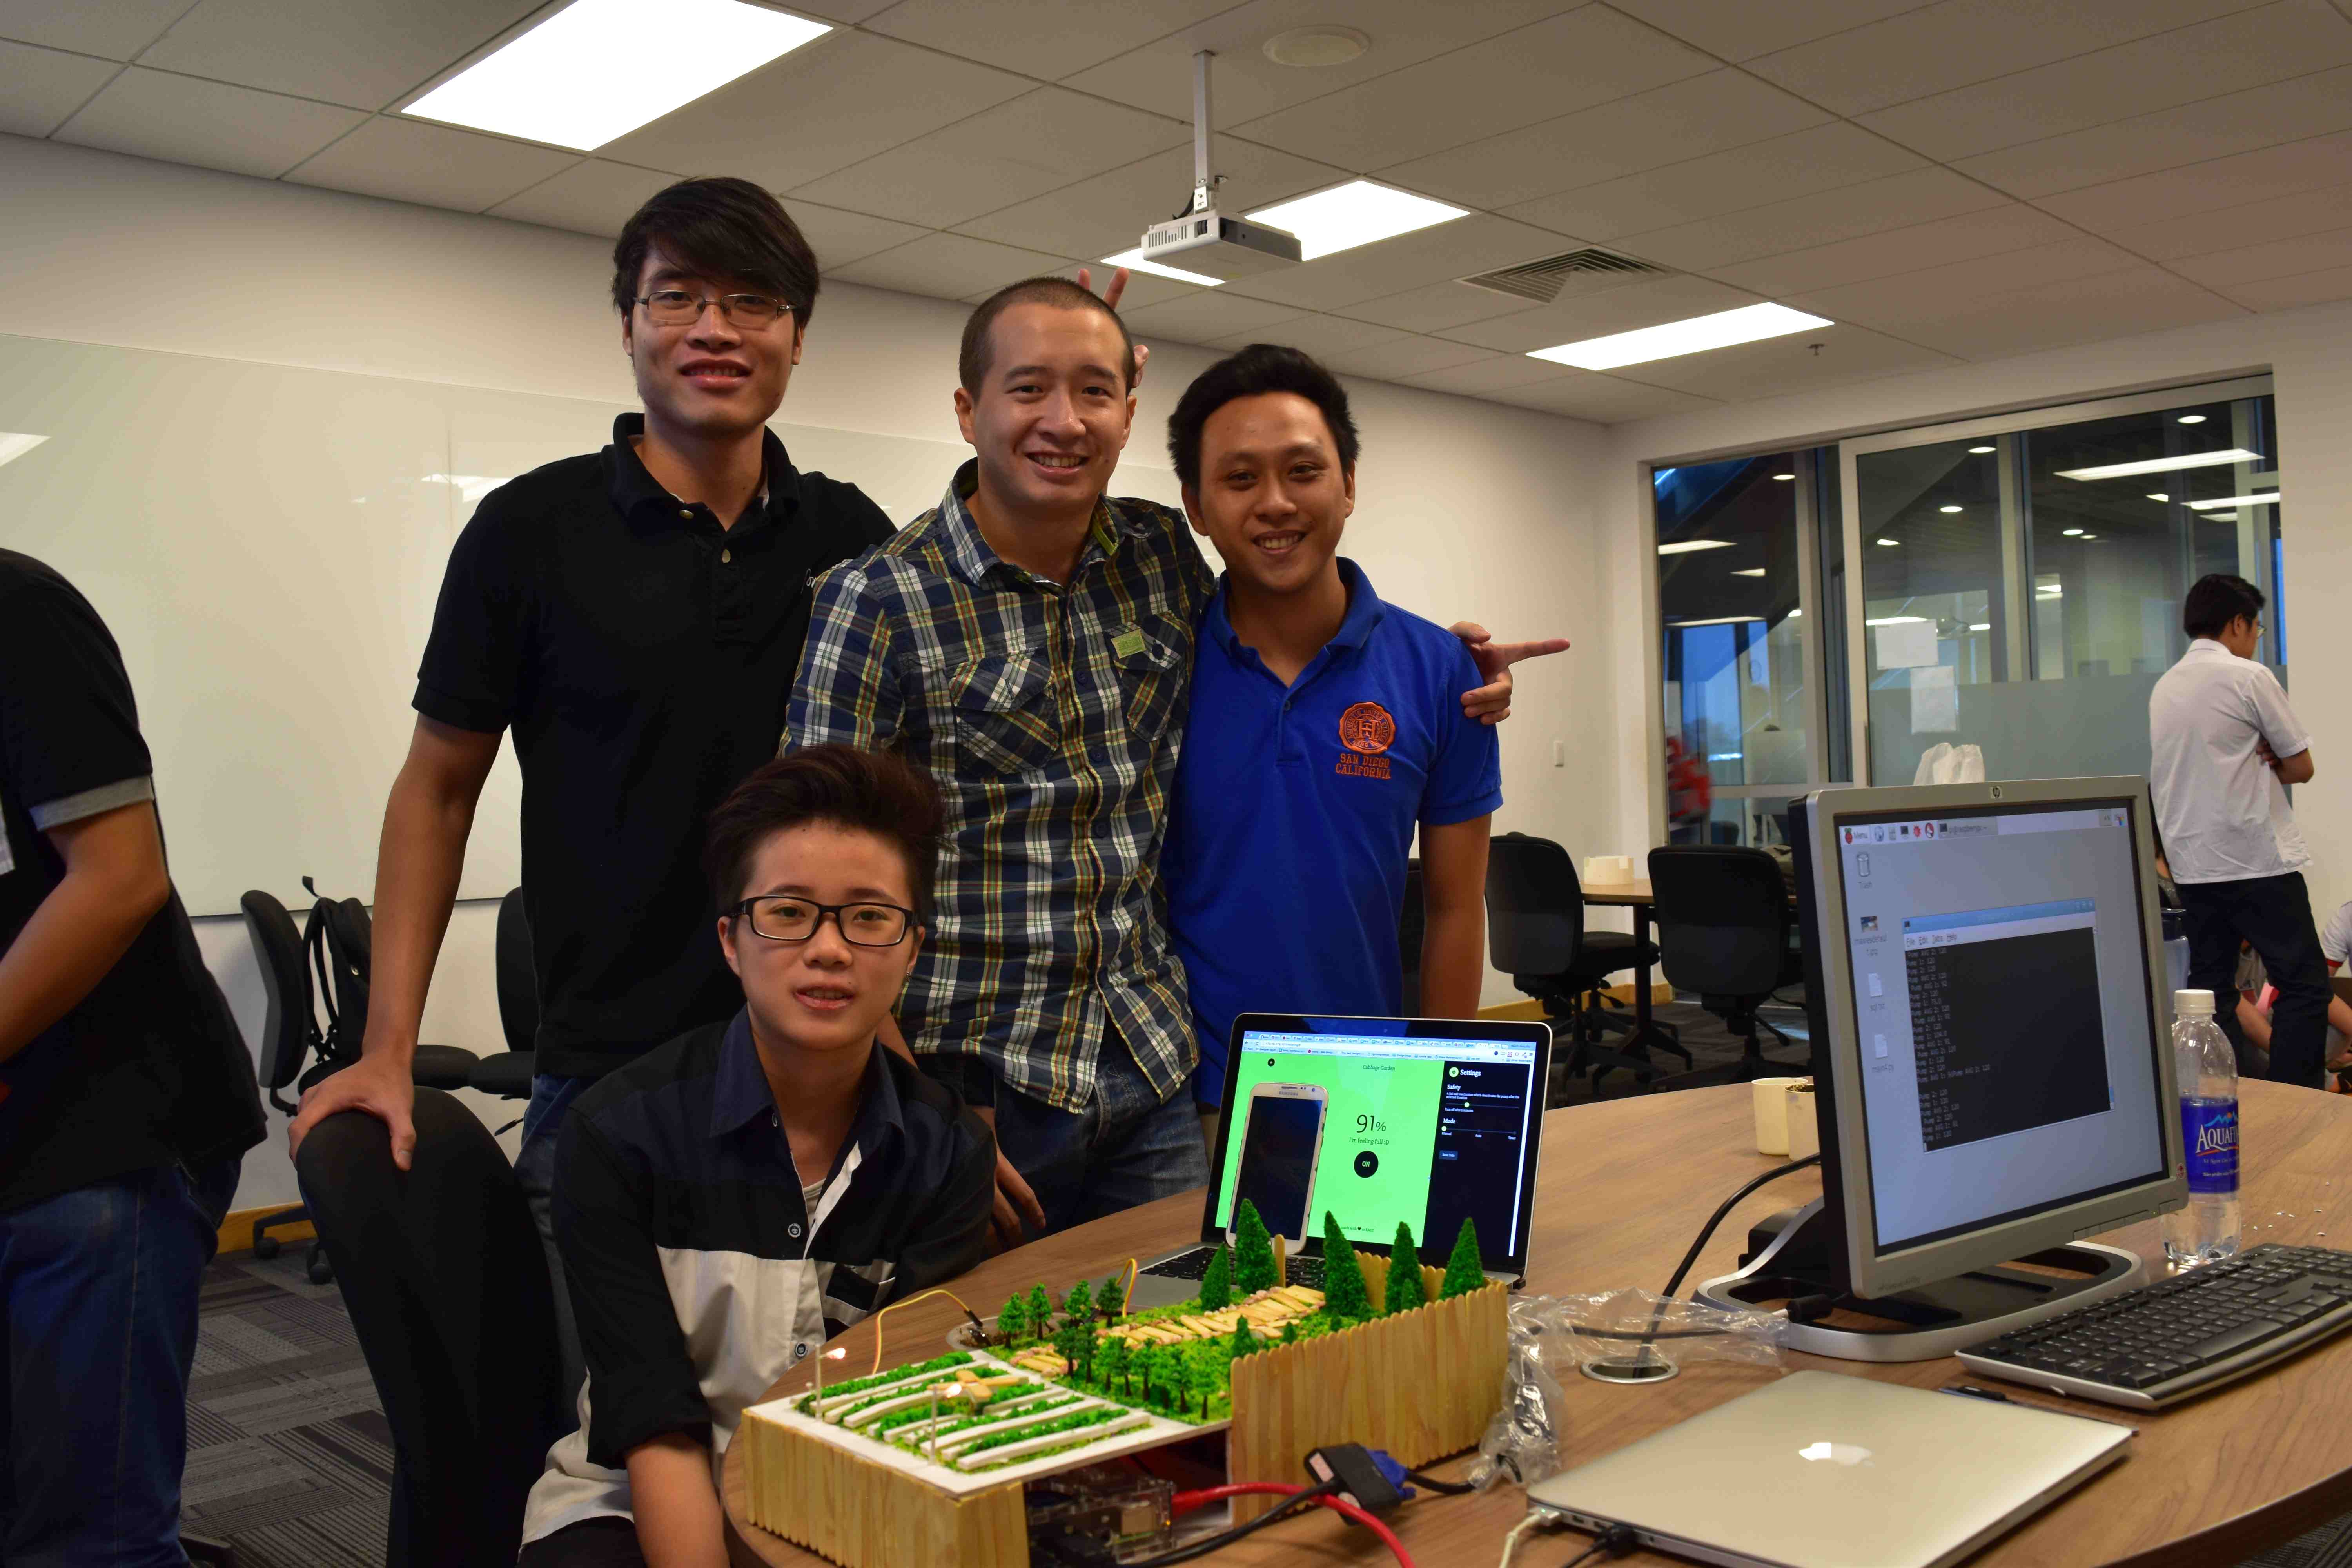 RMIT Vietnam Bachelor of Information Technology students (from left) Pham Duc Thanh, Bui Viet Phuong, Nguyen Son Hai Dang and (sitting) Tran Thach Thao behind the Automatic Irrigation System at the RMIT Careers and Technology Showcase, September, 2016.